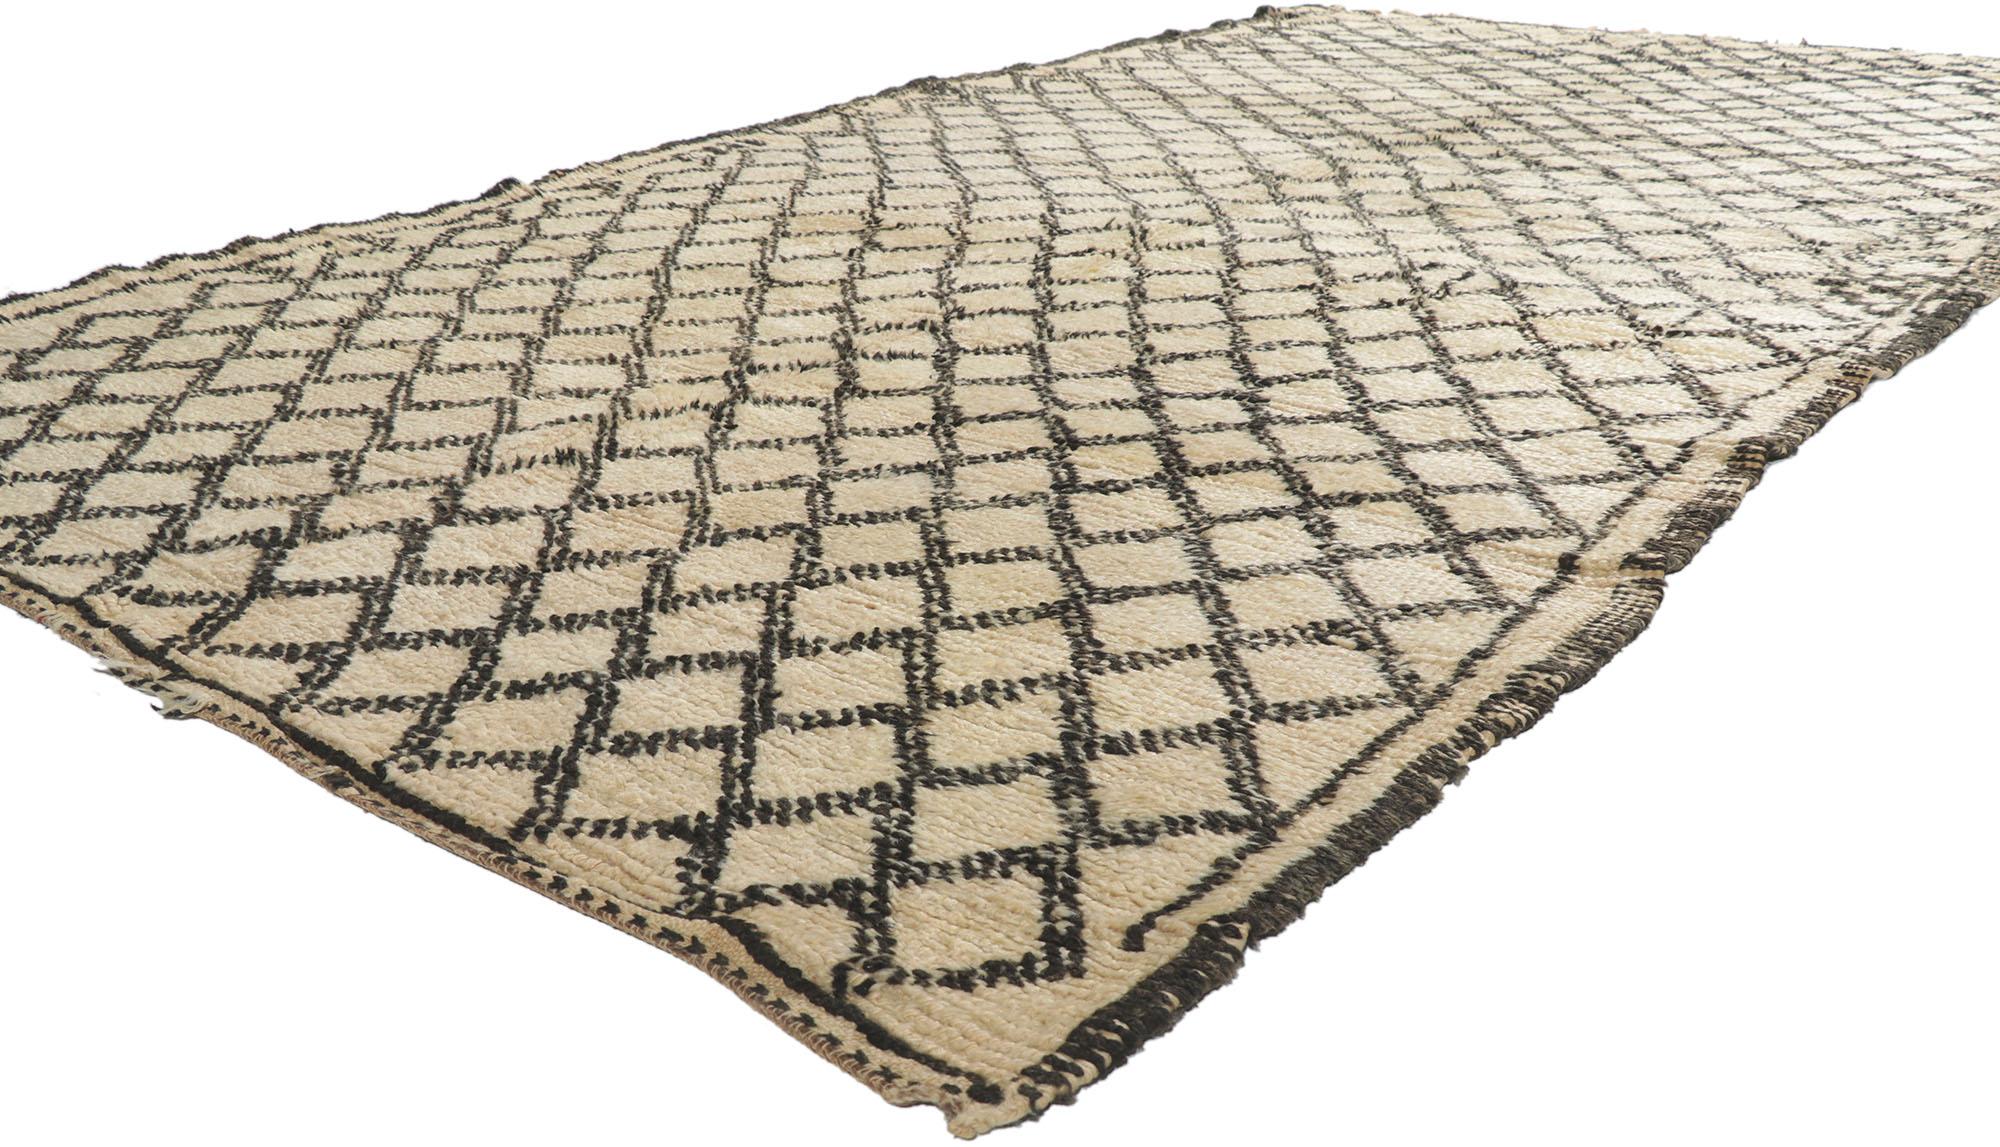 21350 Vintage Berber Moroccan Beni Ourain Rug with Tribal Style 05'10 x 11'04. Emerging from the esteemed Beni Ourain tribe in Morocco, these intricately crafted rugs pay homage to tradition with meticulous attention to detail, employing untreated